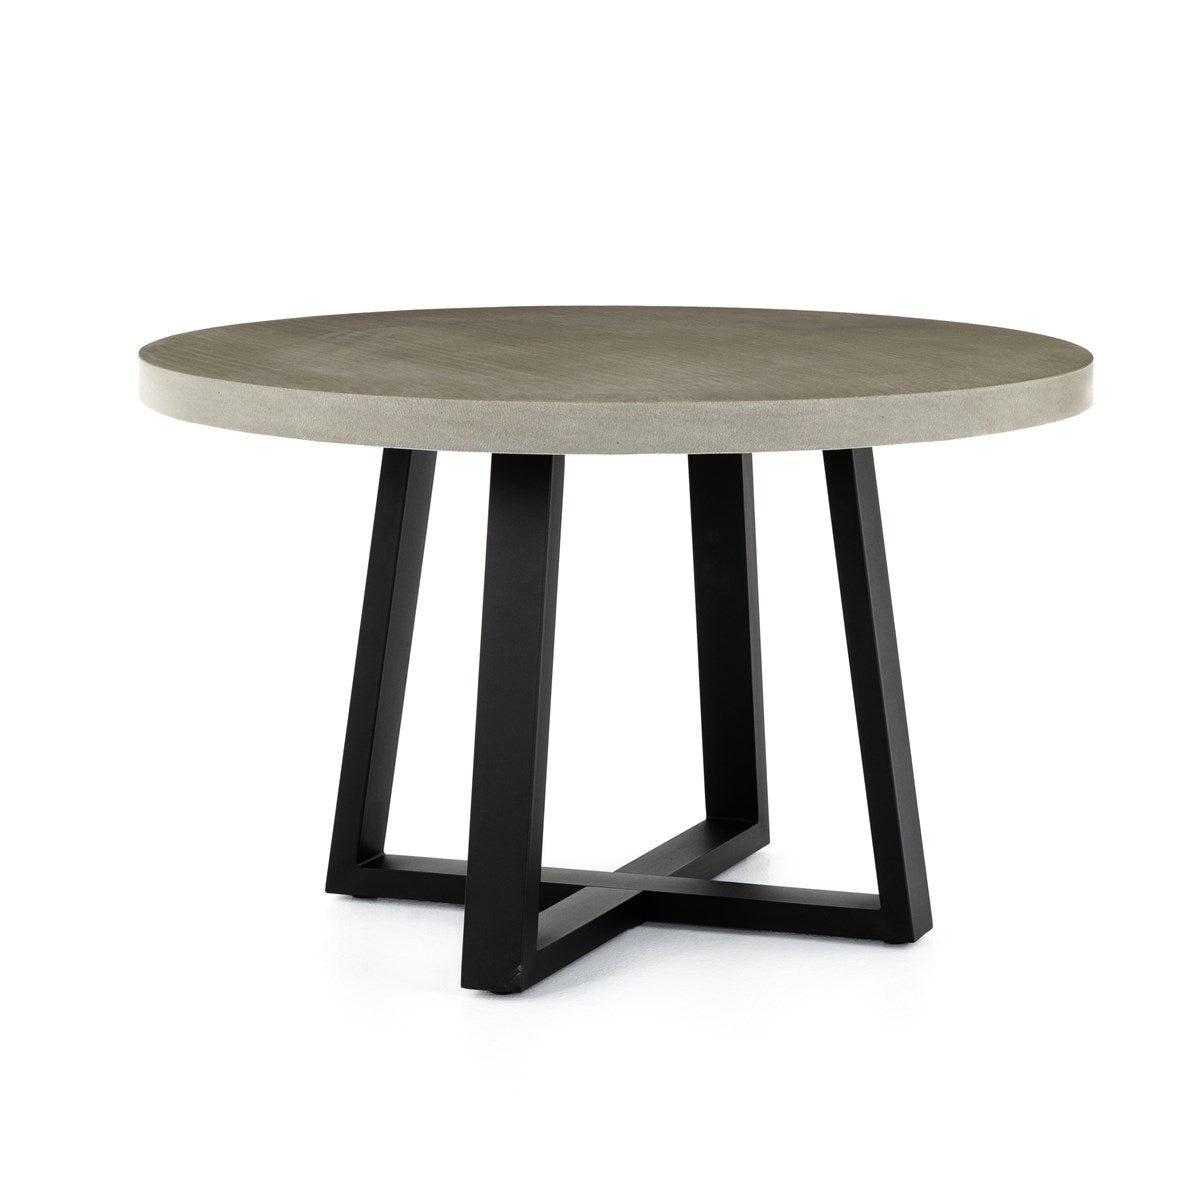 Load image into Gallery viewer, Cyrus Outdoor Round Dining Table 48&amp;quot;Dining Table Four Hands  48&amp;quot;   Four Hands, Burke Decor, Mid Century Modern Furniture, Old Bones Furniture Company, Old Bones Co, Modern Mid Century, Designer Furniture, https://www.oldbonesco.com/
